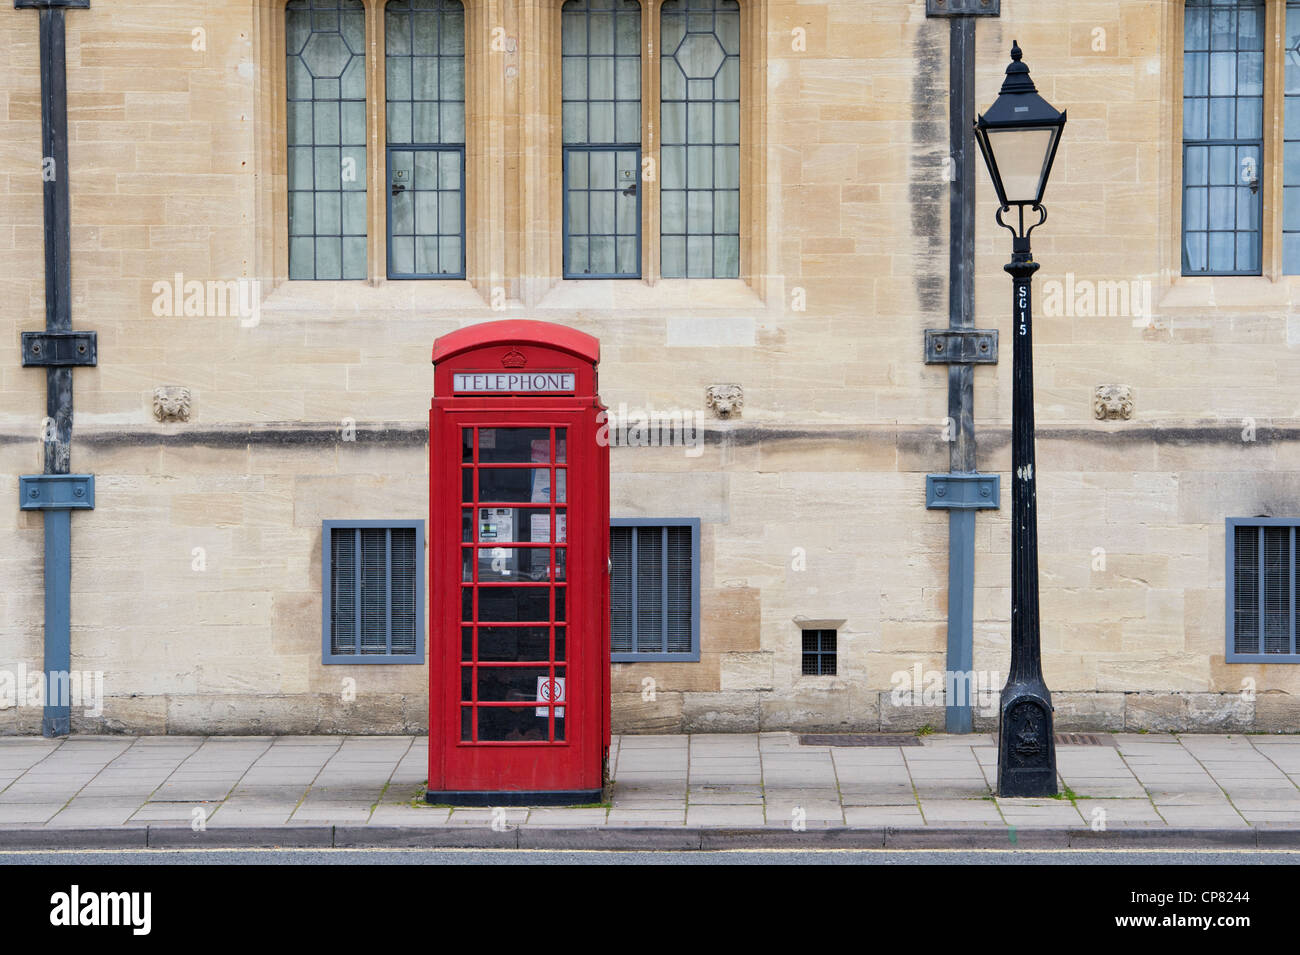 Rote Telefonzelle und Lamp Post in St Giles, Oxford, Oxfordshire, England Stockfoto